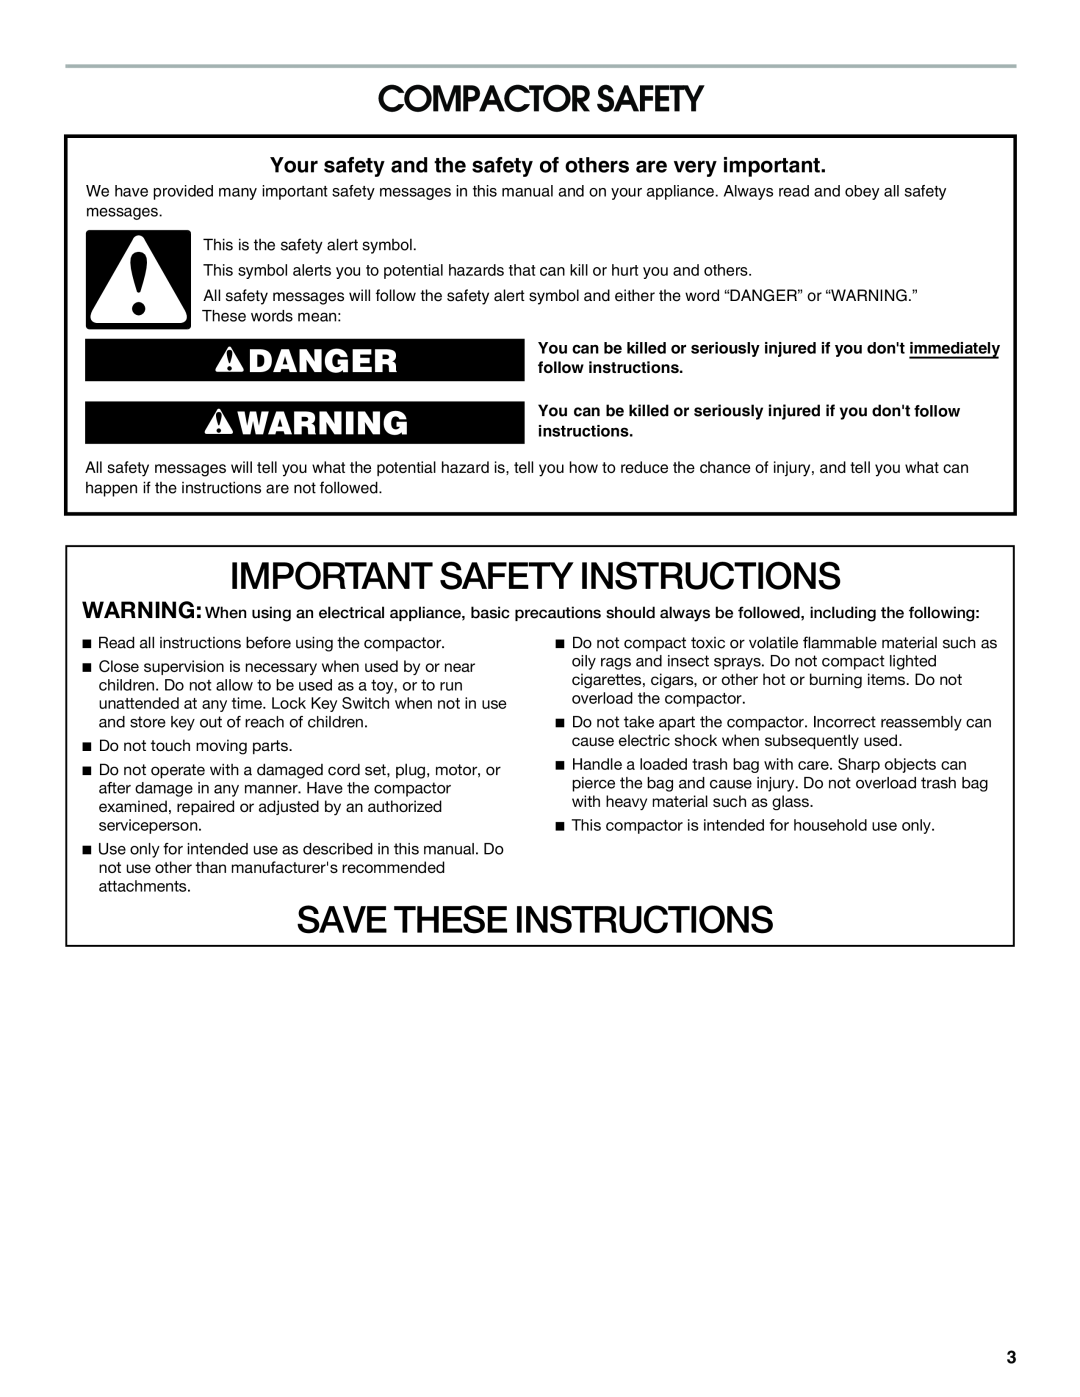 Jenn-Air W10242571A manual Important Safety Instructions, Save These Instructions, Compactor Safety, Danger 